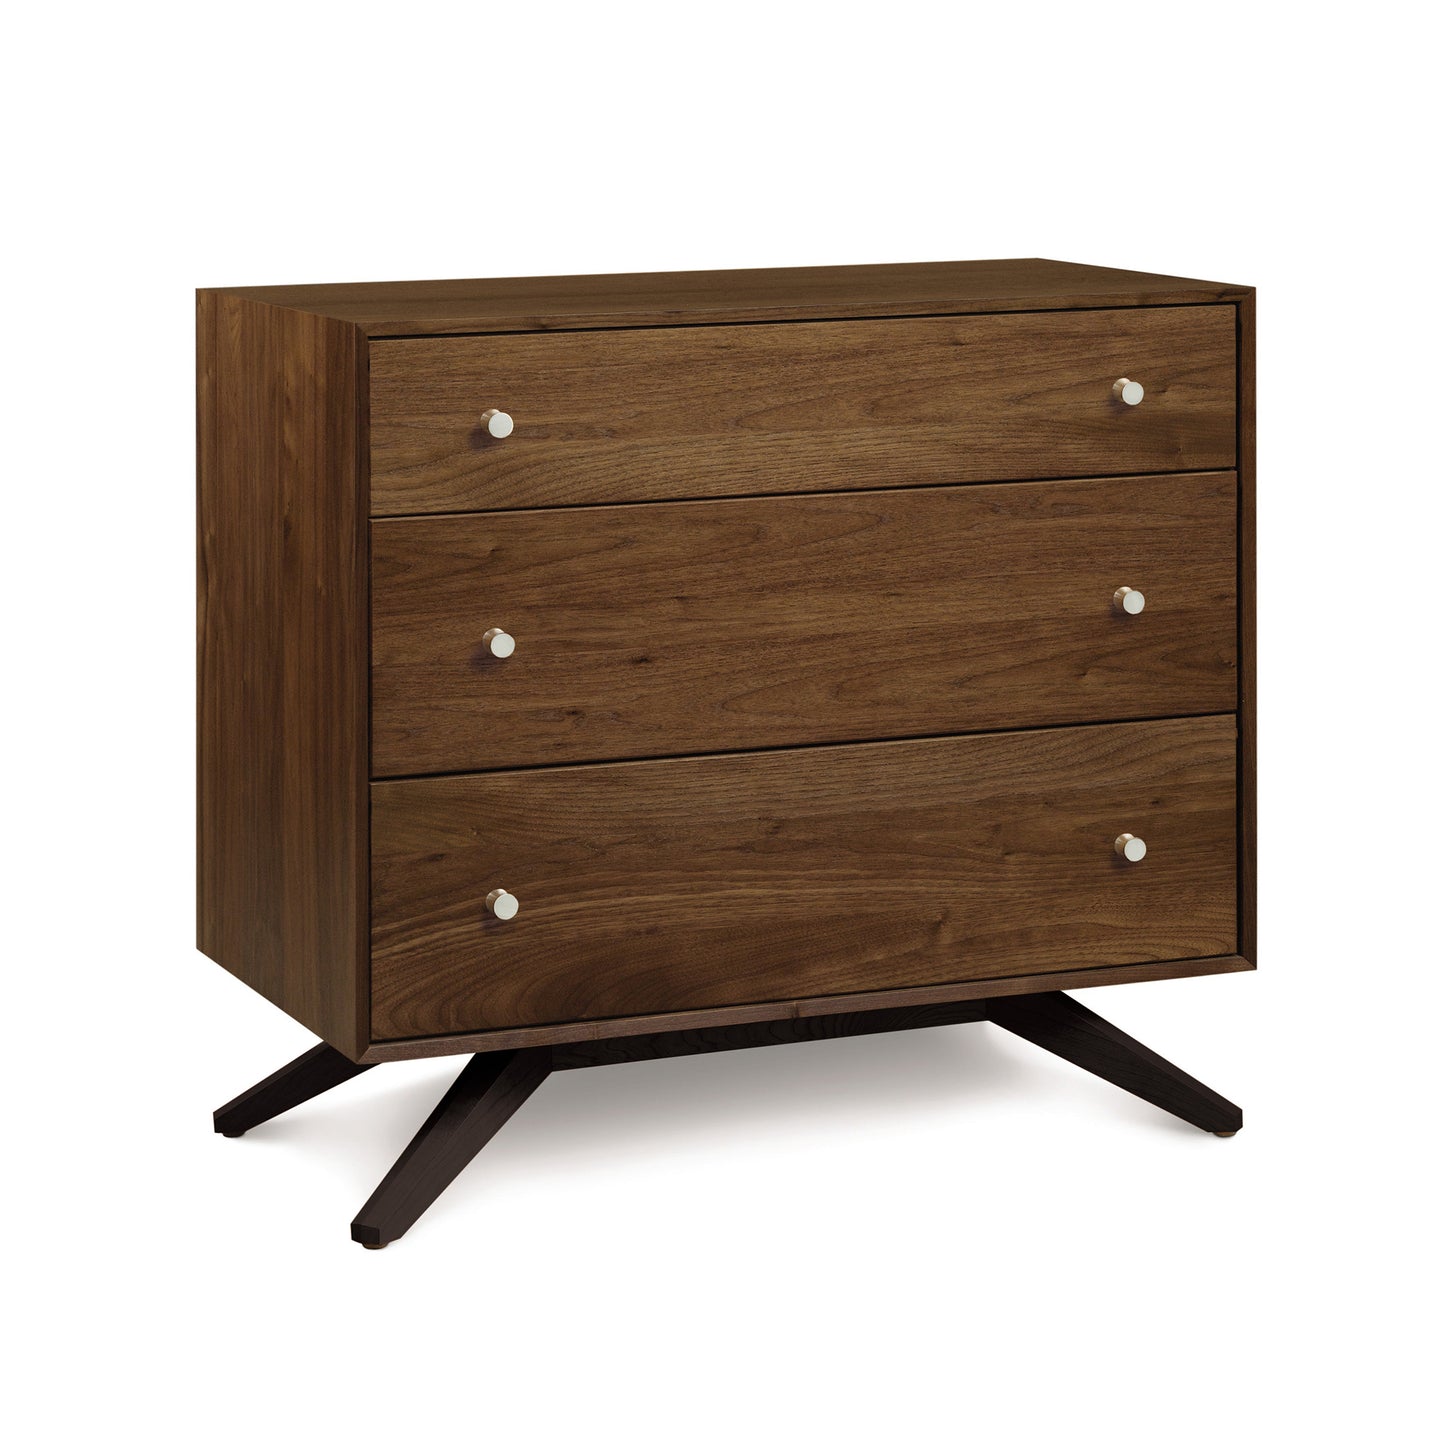 The Astrid 3-Drawer Chest by Copeland Furniture is a modern piece featuring sustainable hardwood and wooden legs.